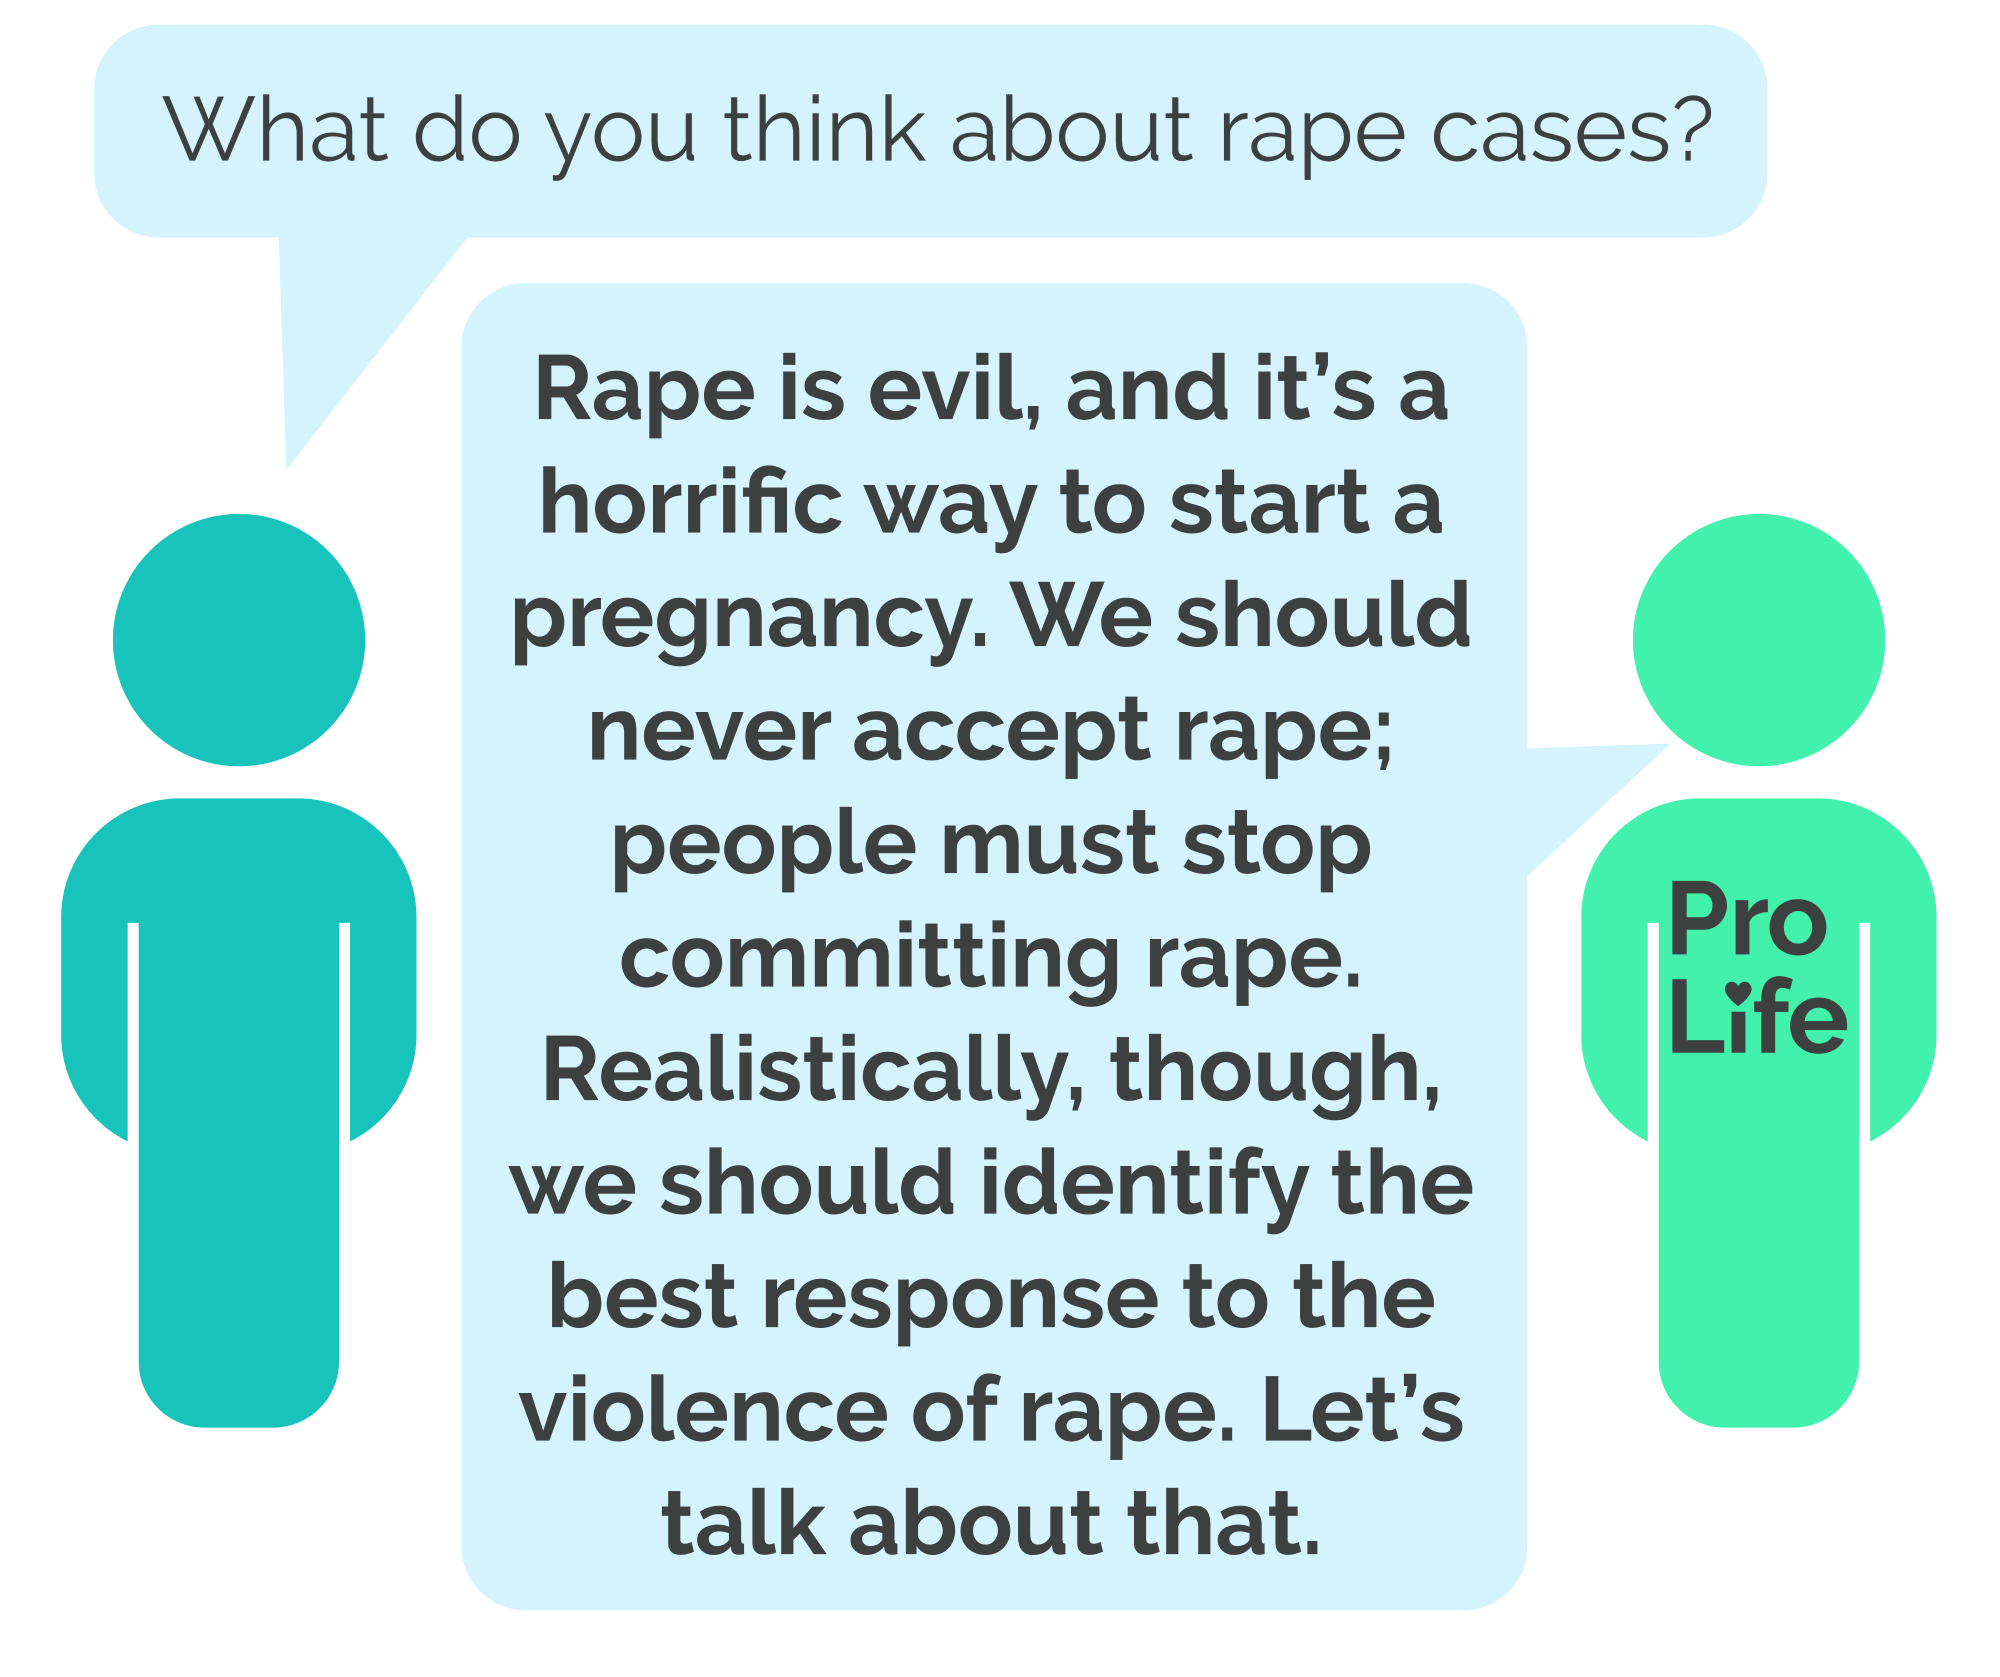 Person 1: What do you think about rape cases? Person 2 (our hero): Rape is evil, and it’s a horrific way to start a pregnancy. We should never accept rape; people must stop committing rape. Realistically, though, we should identify the best response to the violence of rape. Let’s talk about that.